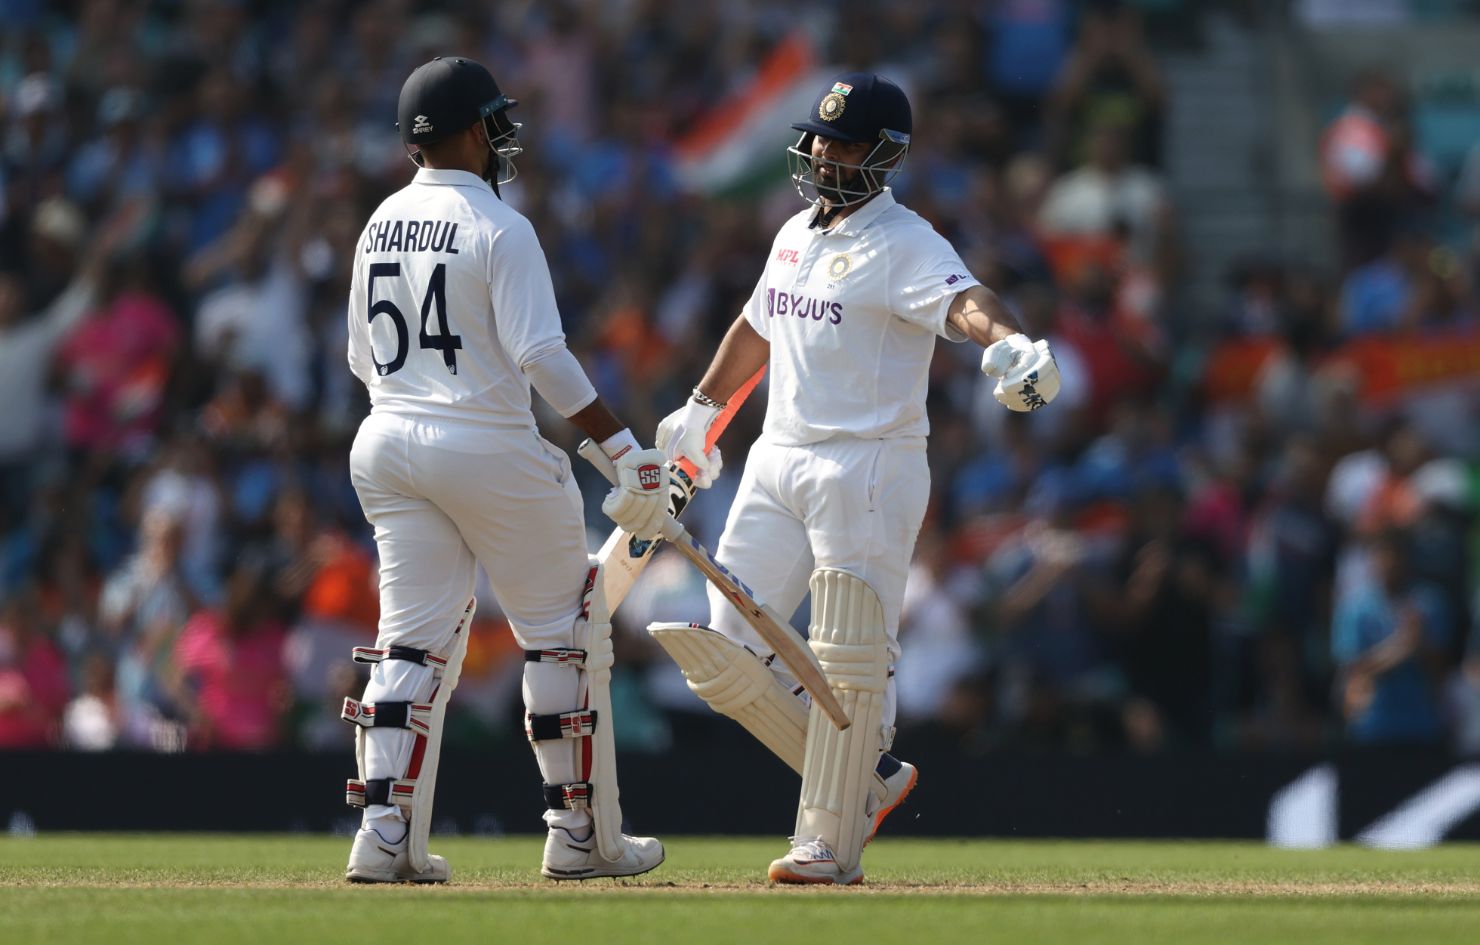 ENG vs IND | 4th Test, Day 4: Shardul- Pant, Hameed-Burns set up a likely rollercoaster finish